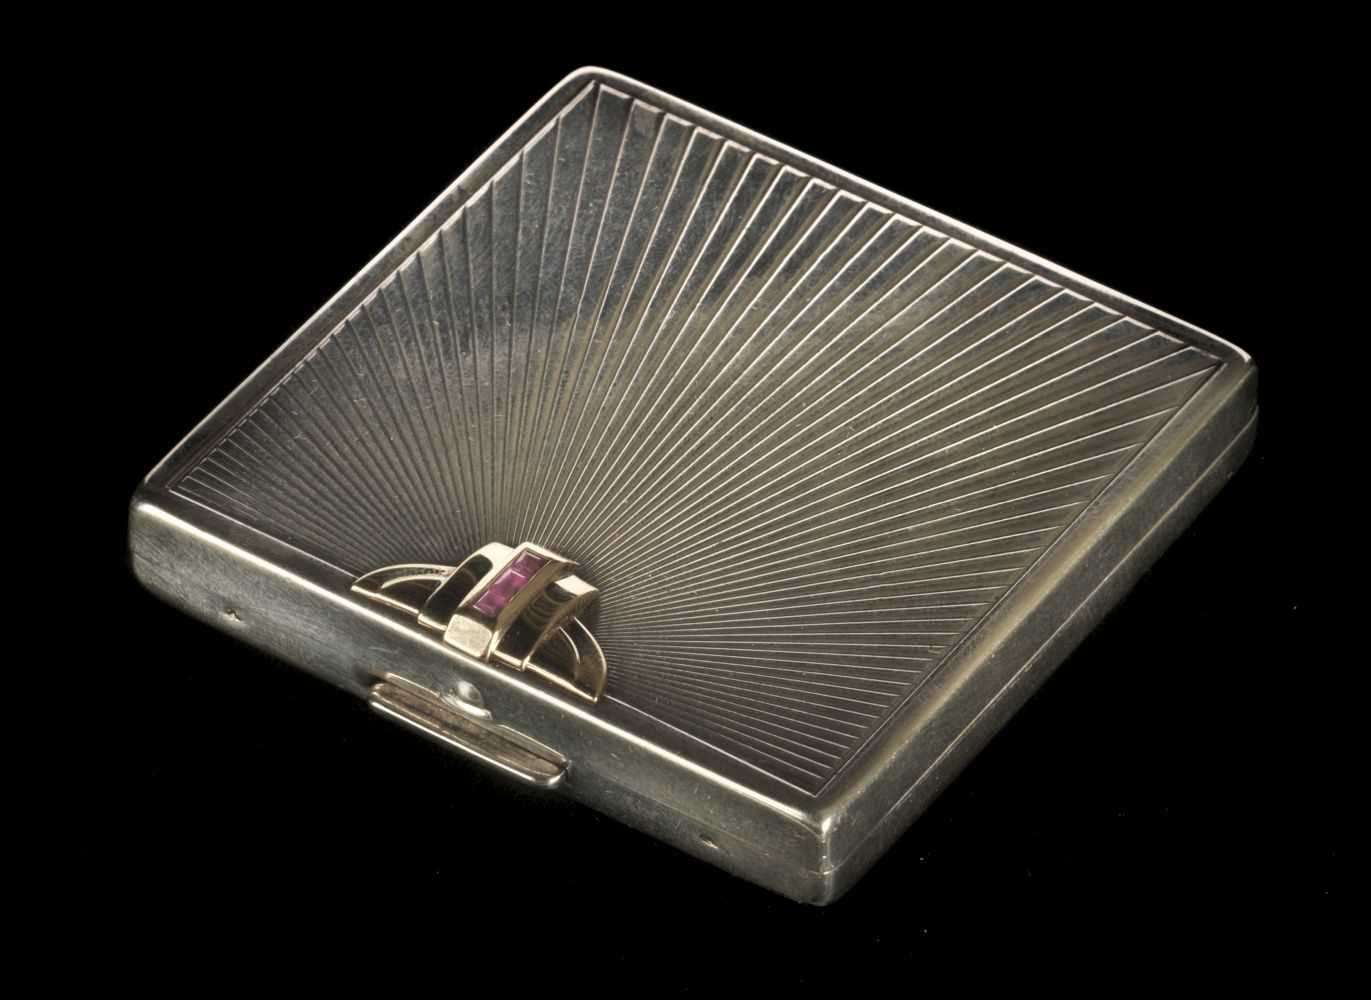 Lot 102 - Tiffany & Co. A silver and gold compact